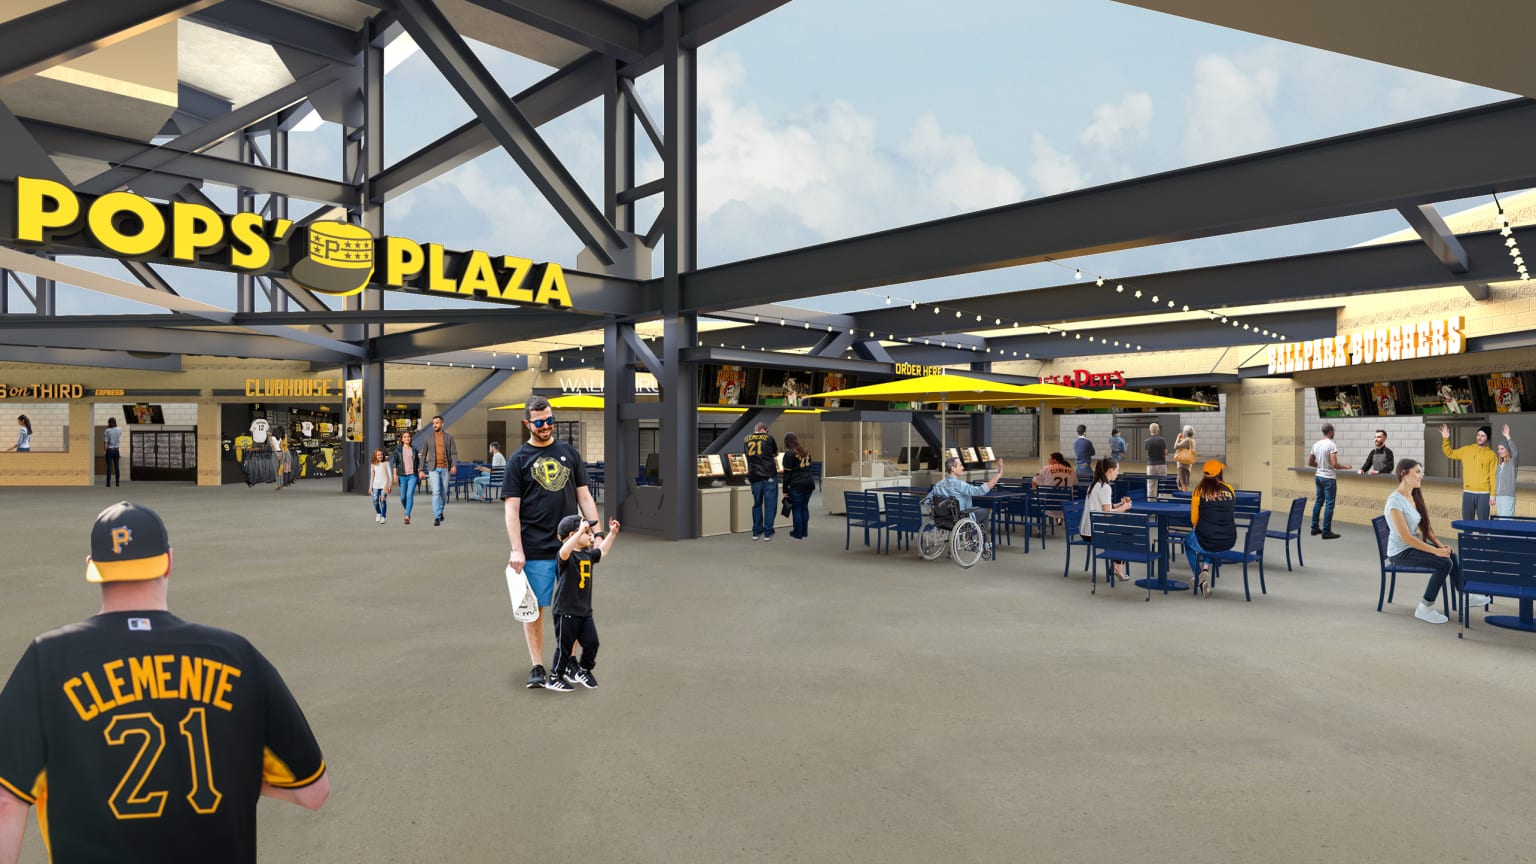 PNC Park enhancements include new scoreboard, faster entry and new